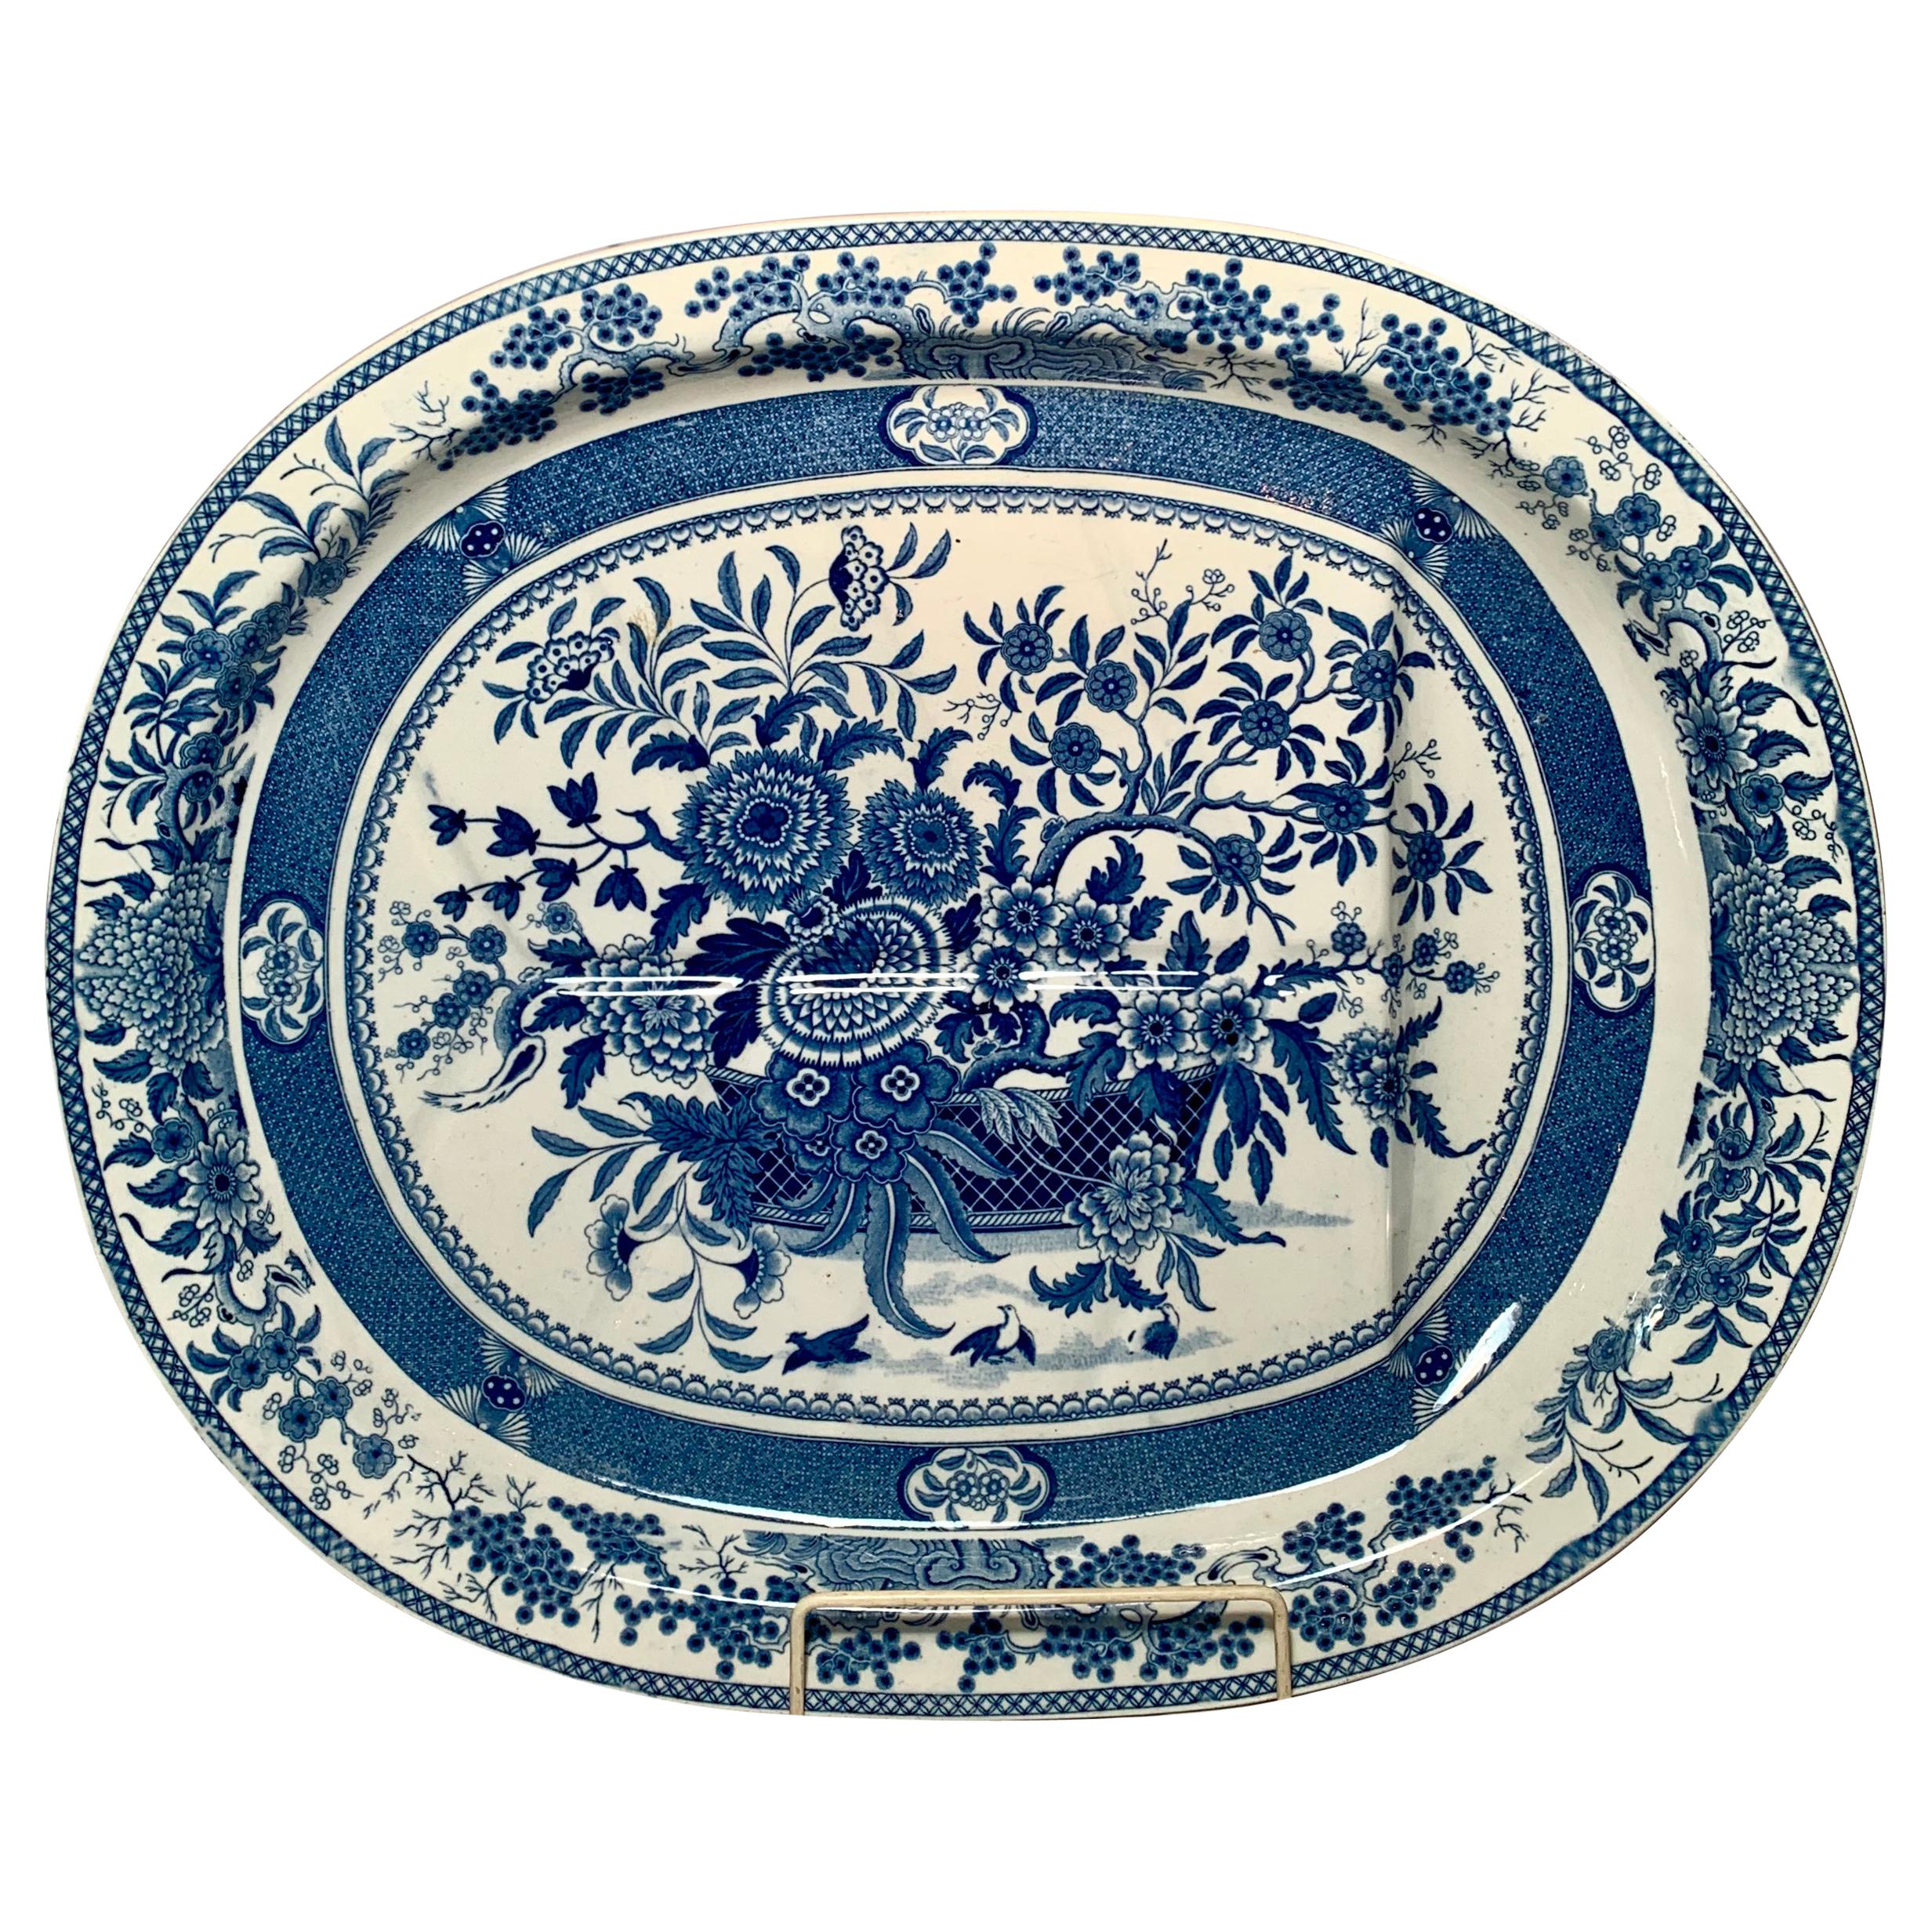 Antique English Spode Meat Tray with Well, circa 1860